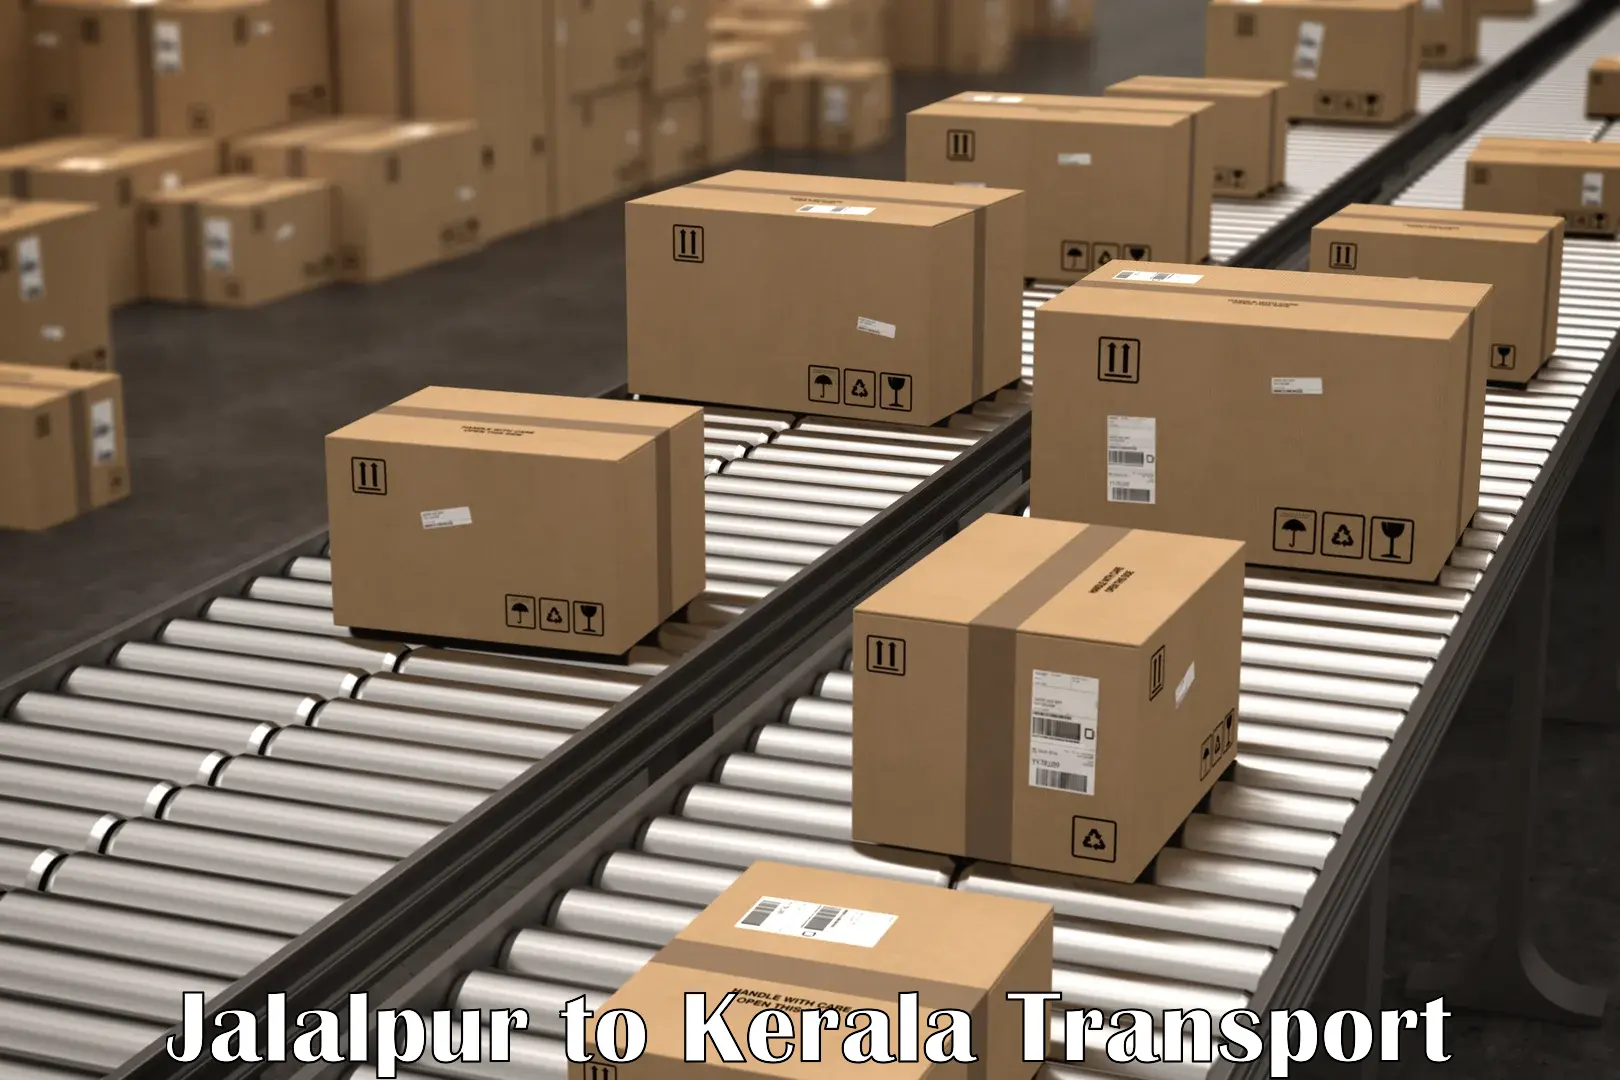 Truck transport companies in India Jalalpur to Allepey